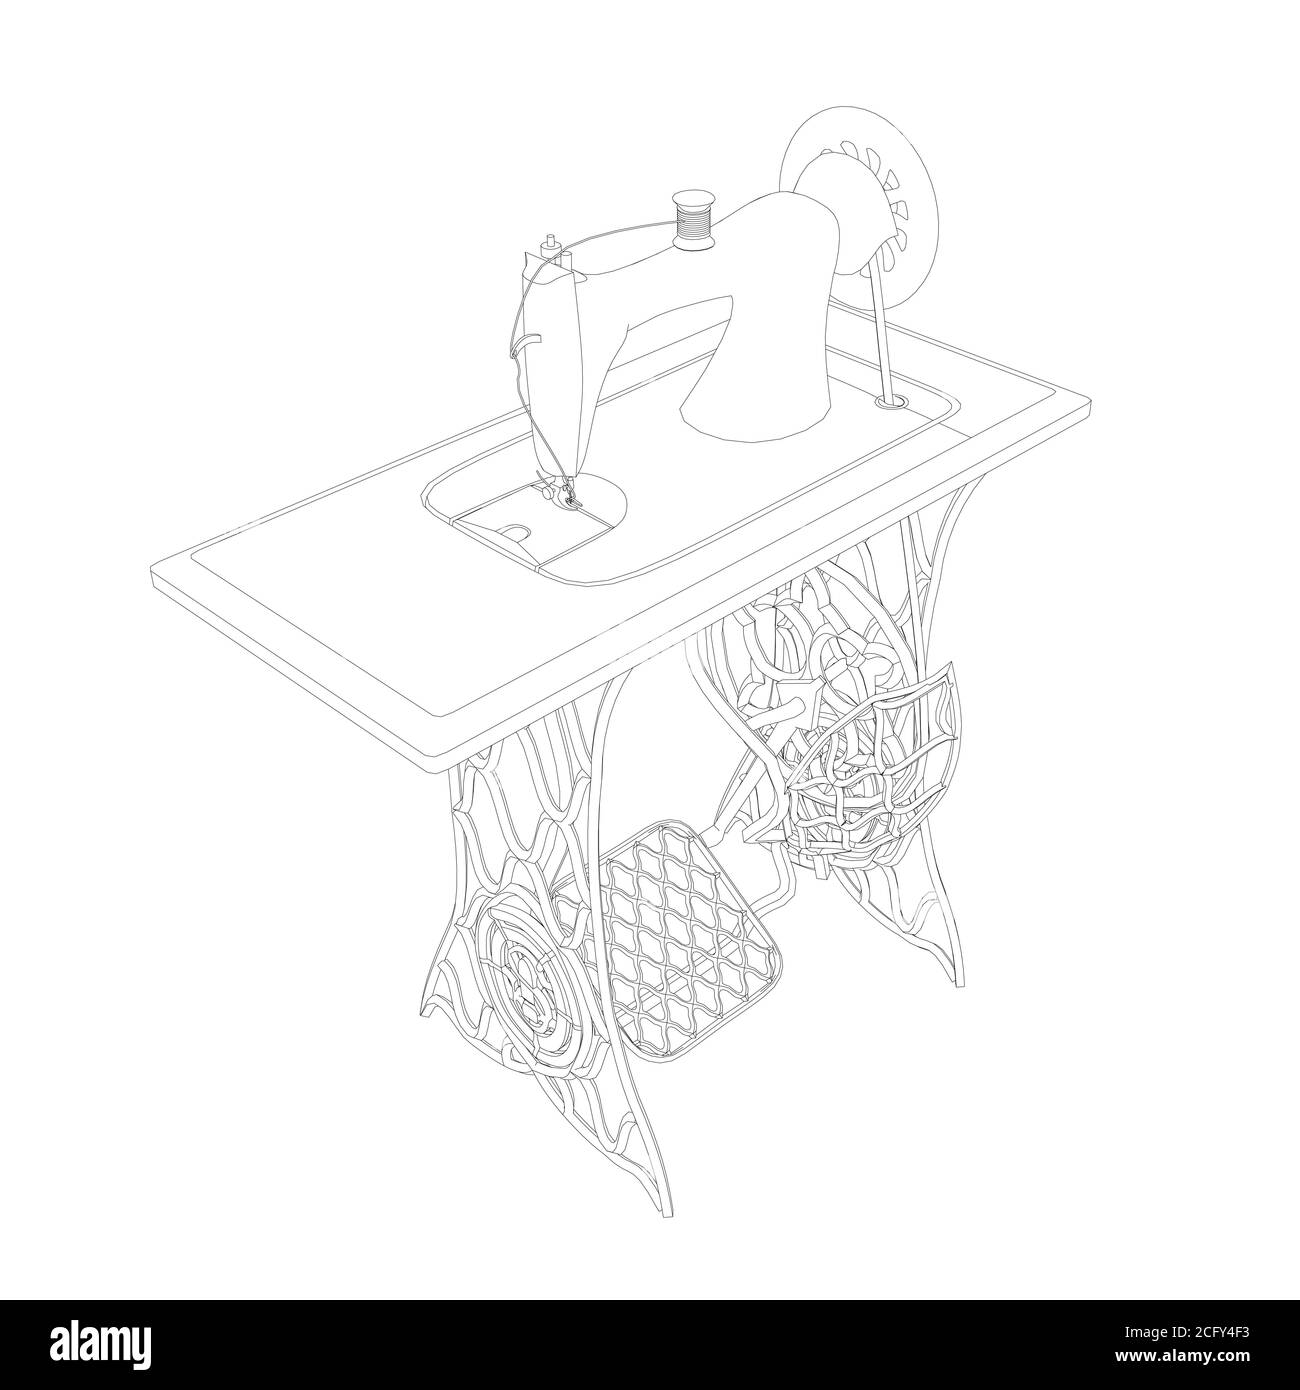 The contour of a decorative vintage sewing machine made of black lines on a white background. Manual sewing machine with rotation mechanism. Isometric Stock Vector